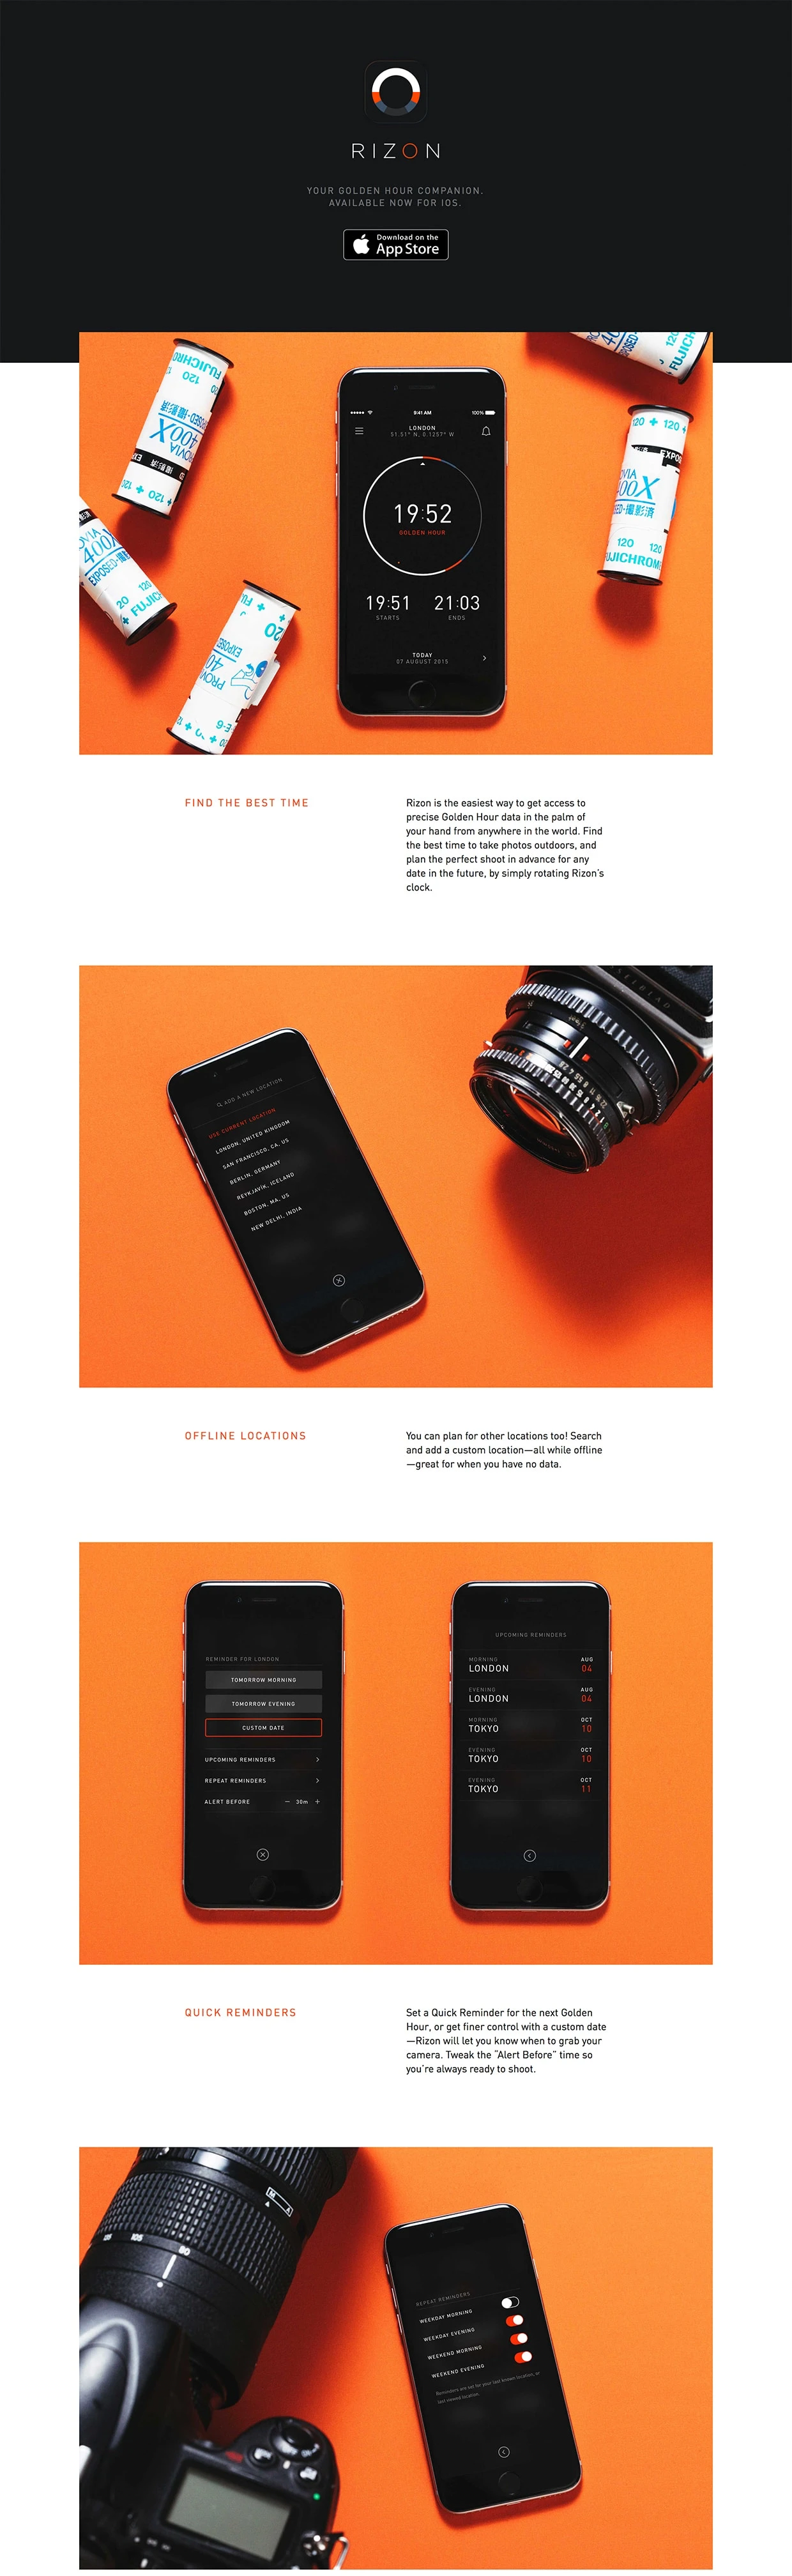 Rizon Landing Page Example: Rizon is a beautiful Golden Hour calculator for your iPhone that helps you easily find the best time to shoot outdoors in natural light. Set reminders, save offline locations, and see data for any date in the future.